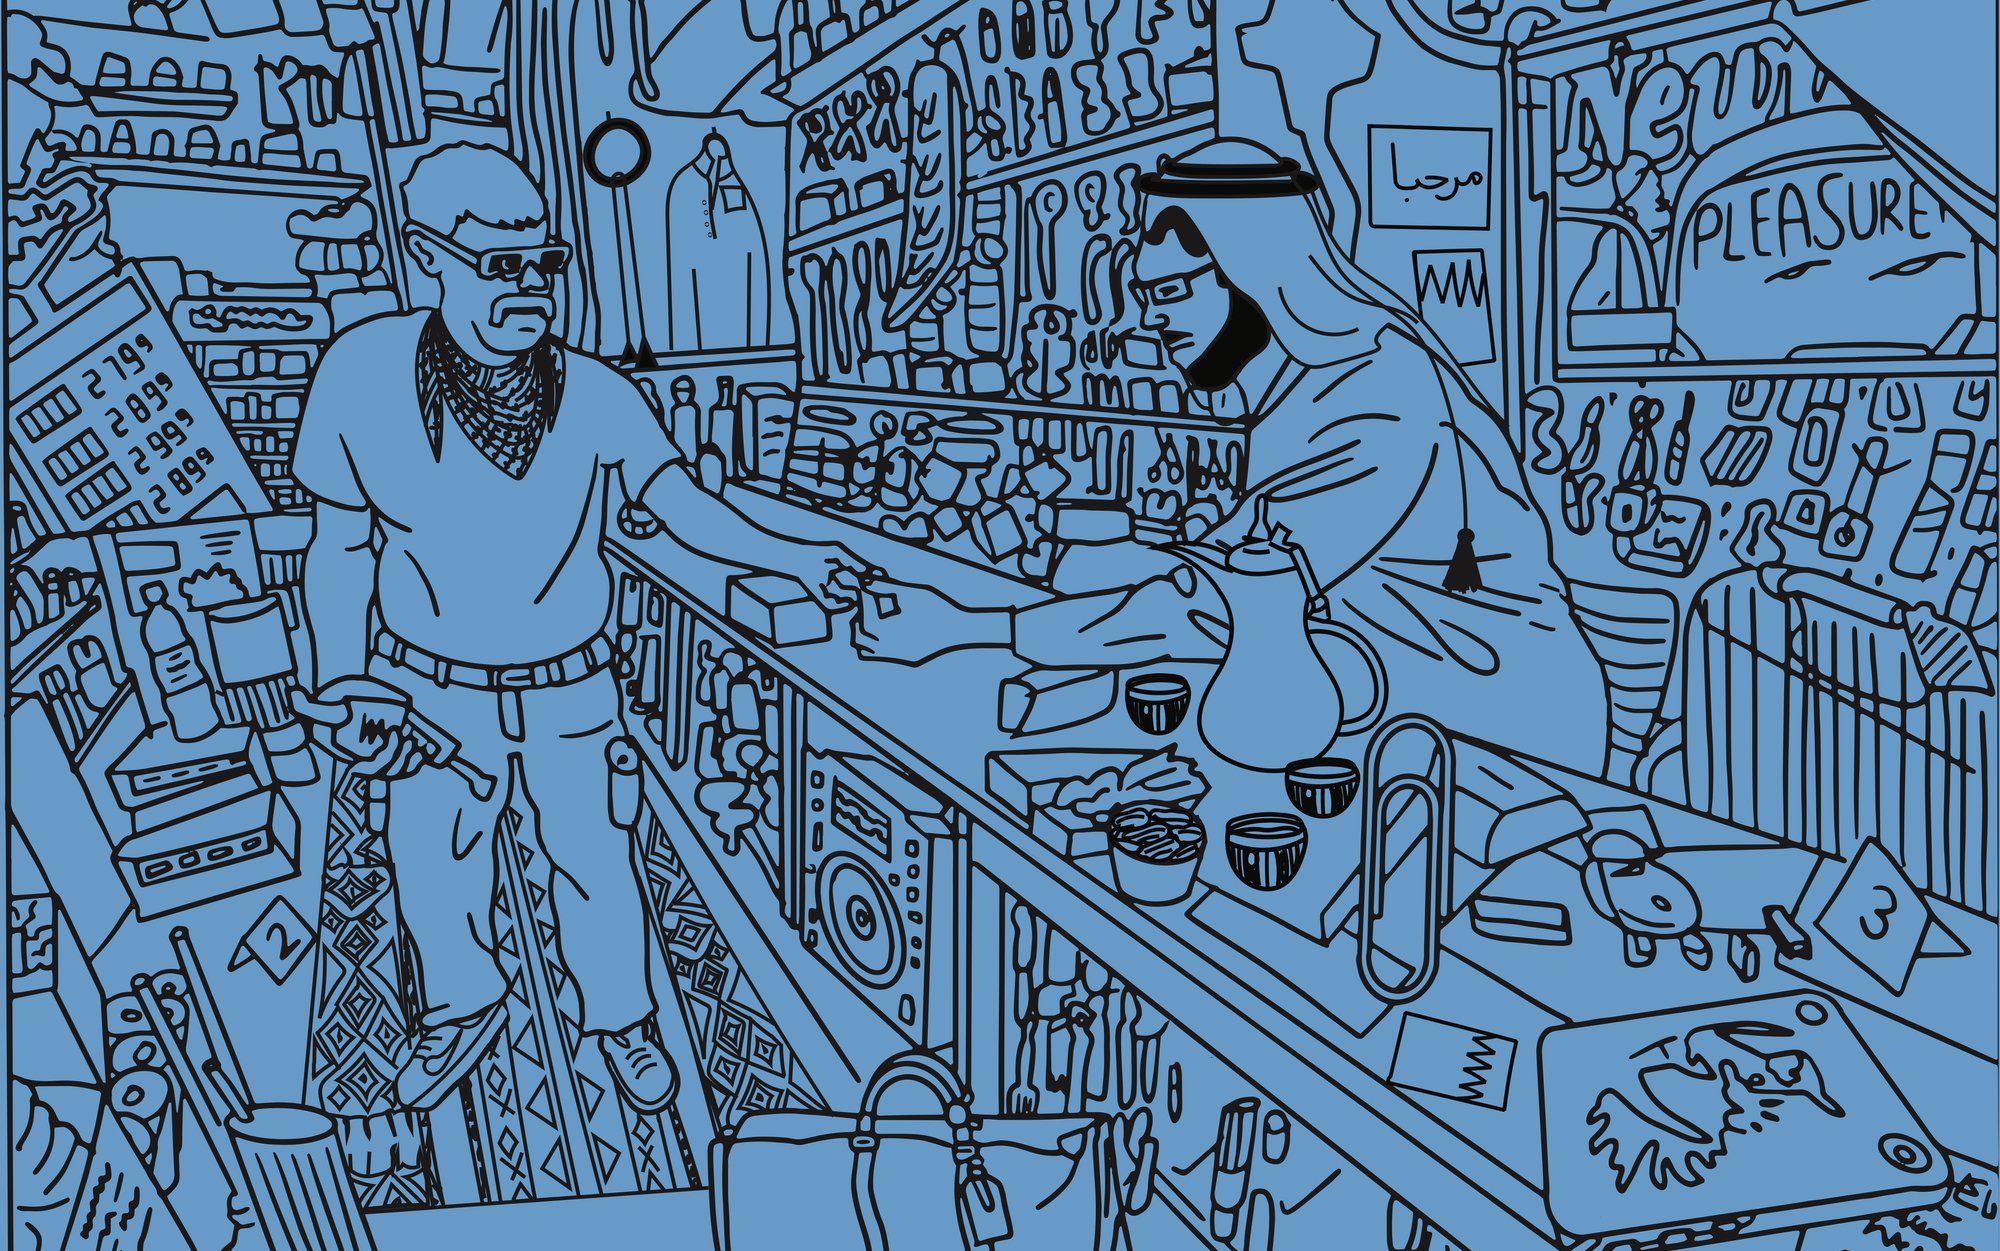 A cartoon drawing of two men at a counter in black on a blue background for the poster of Virgil Abloh's Exhibition in Doha.